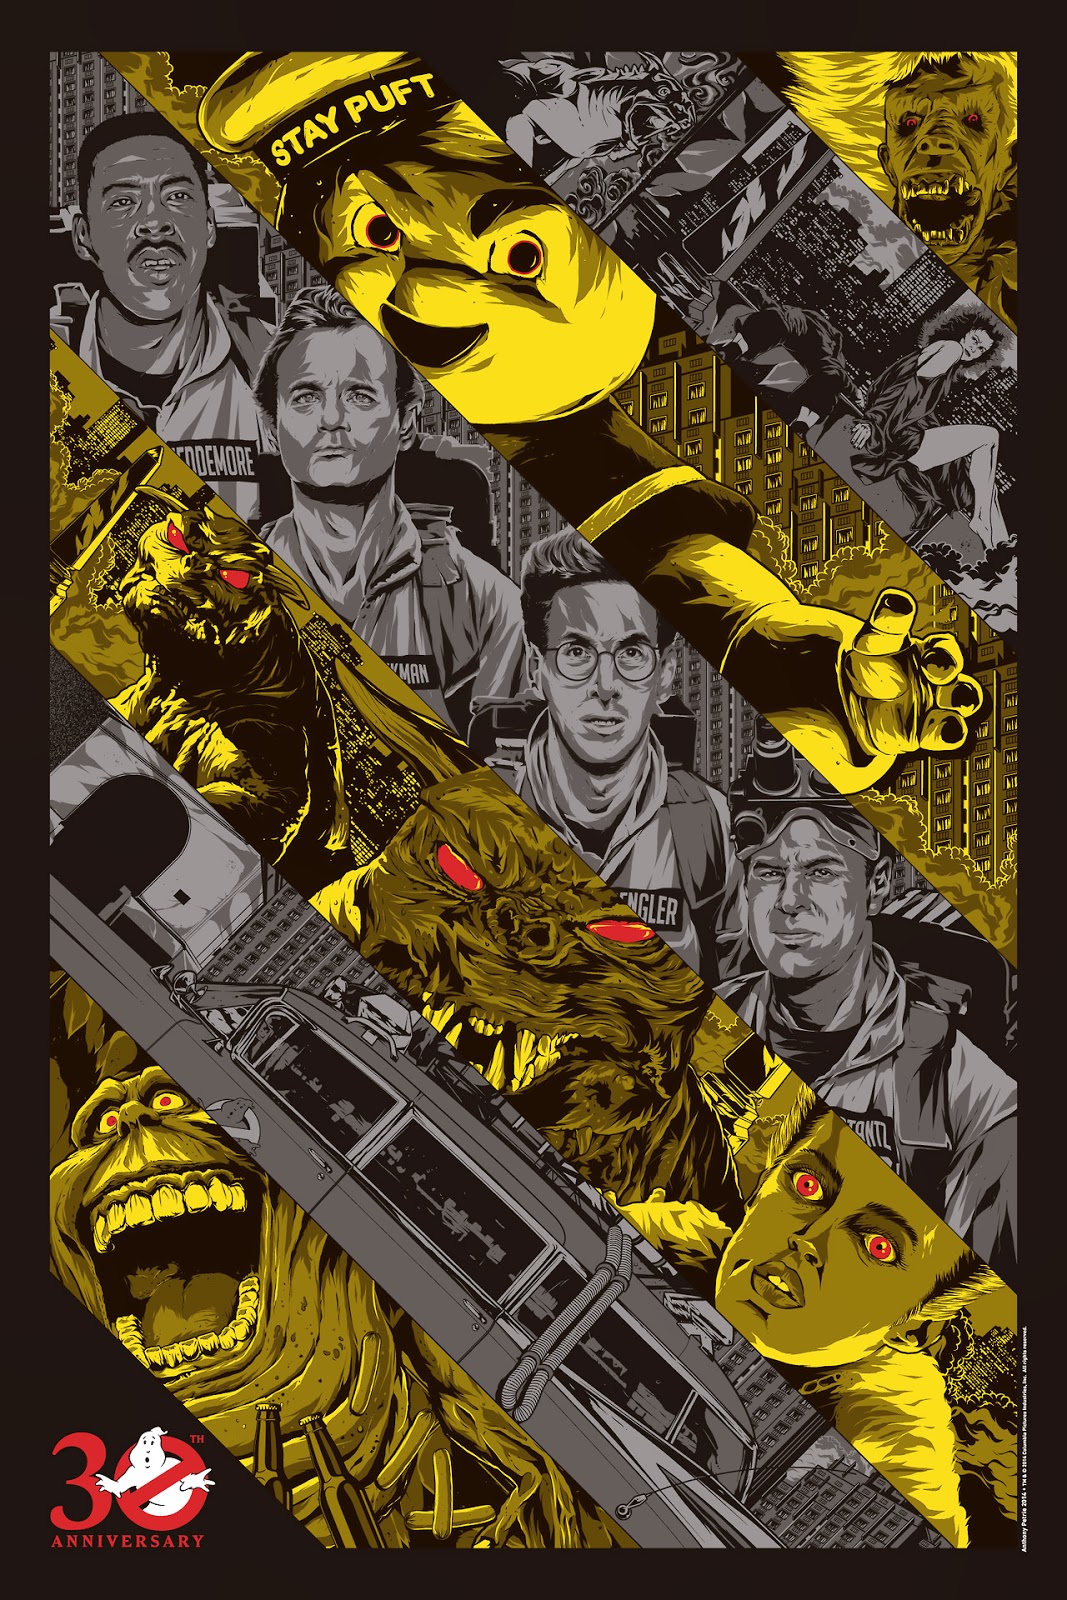 Gallery1988's Ghostbusters 30th Anniversary “Ghostbusted” Screen Print by Anthony Petrie